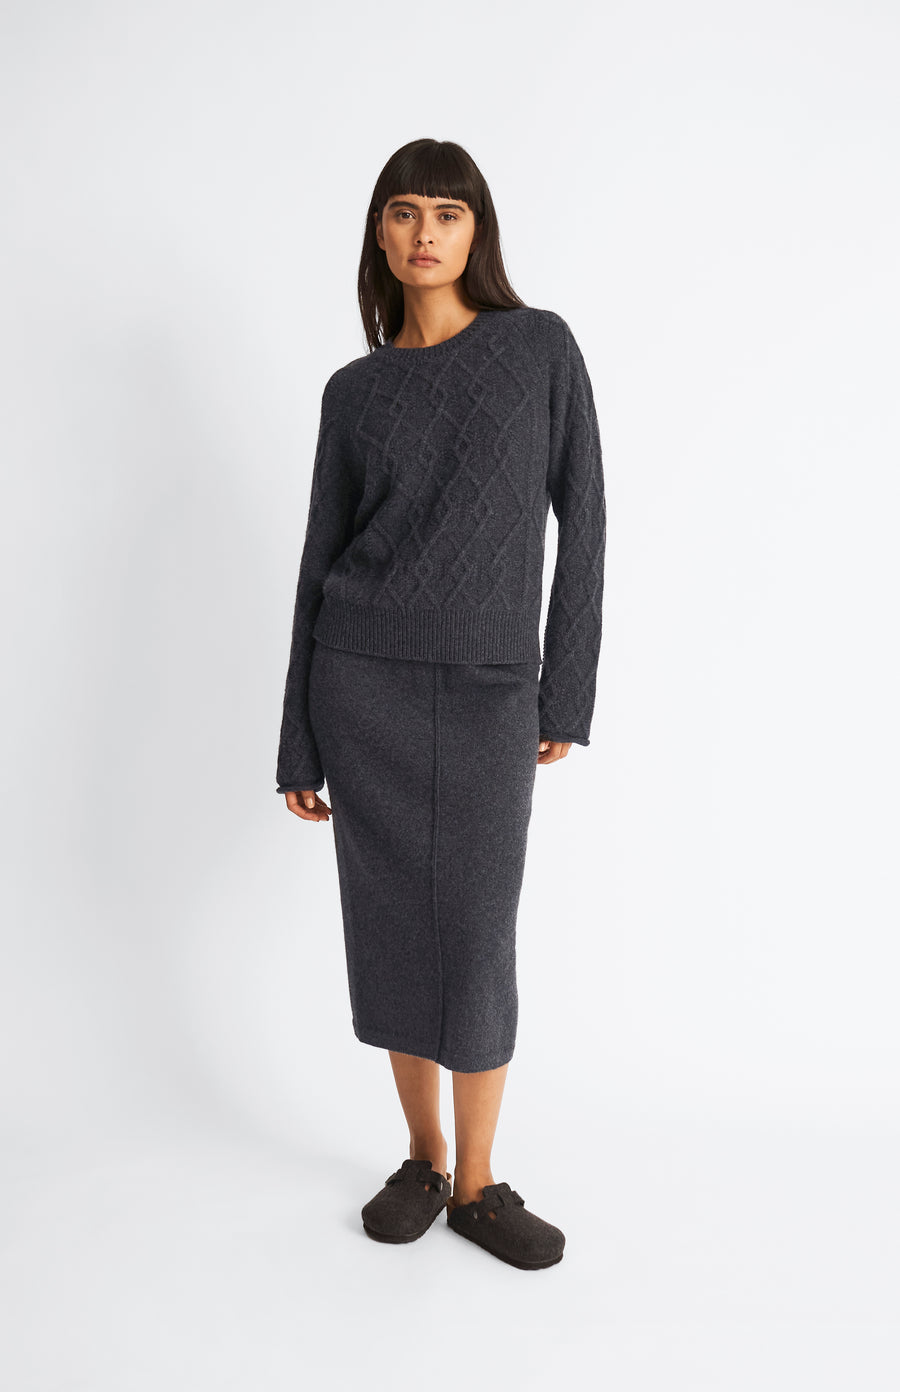 Pringle of Scotland Round Neck Multi Textured Cashmere Blend Jumper in Charcoal on model full length